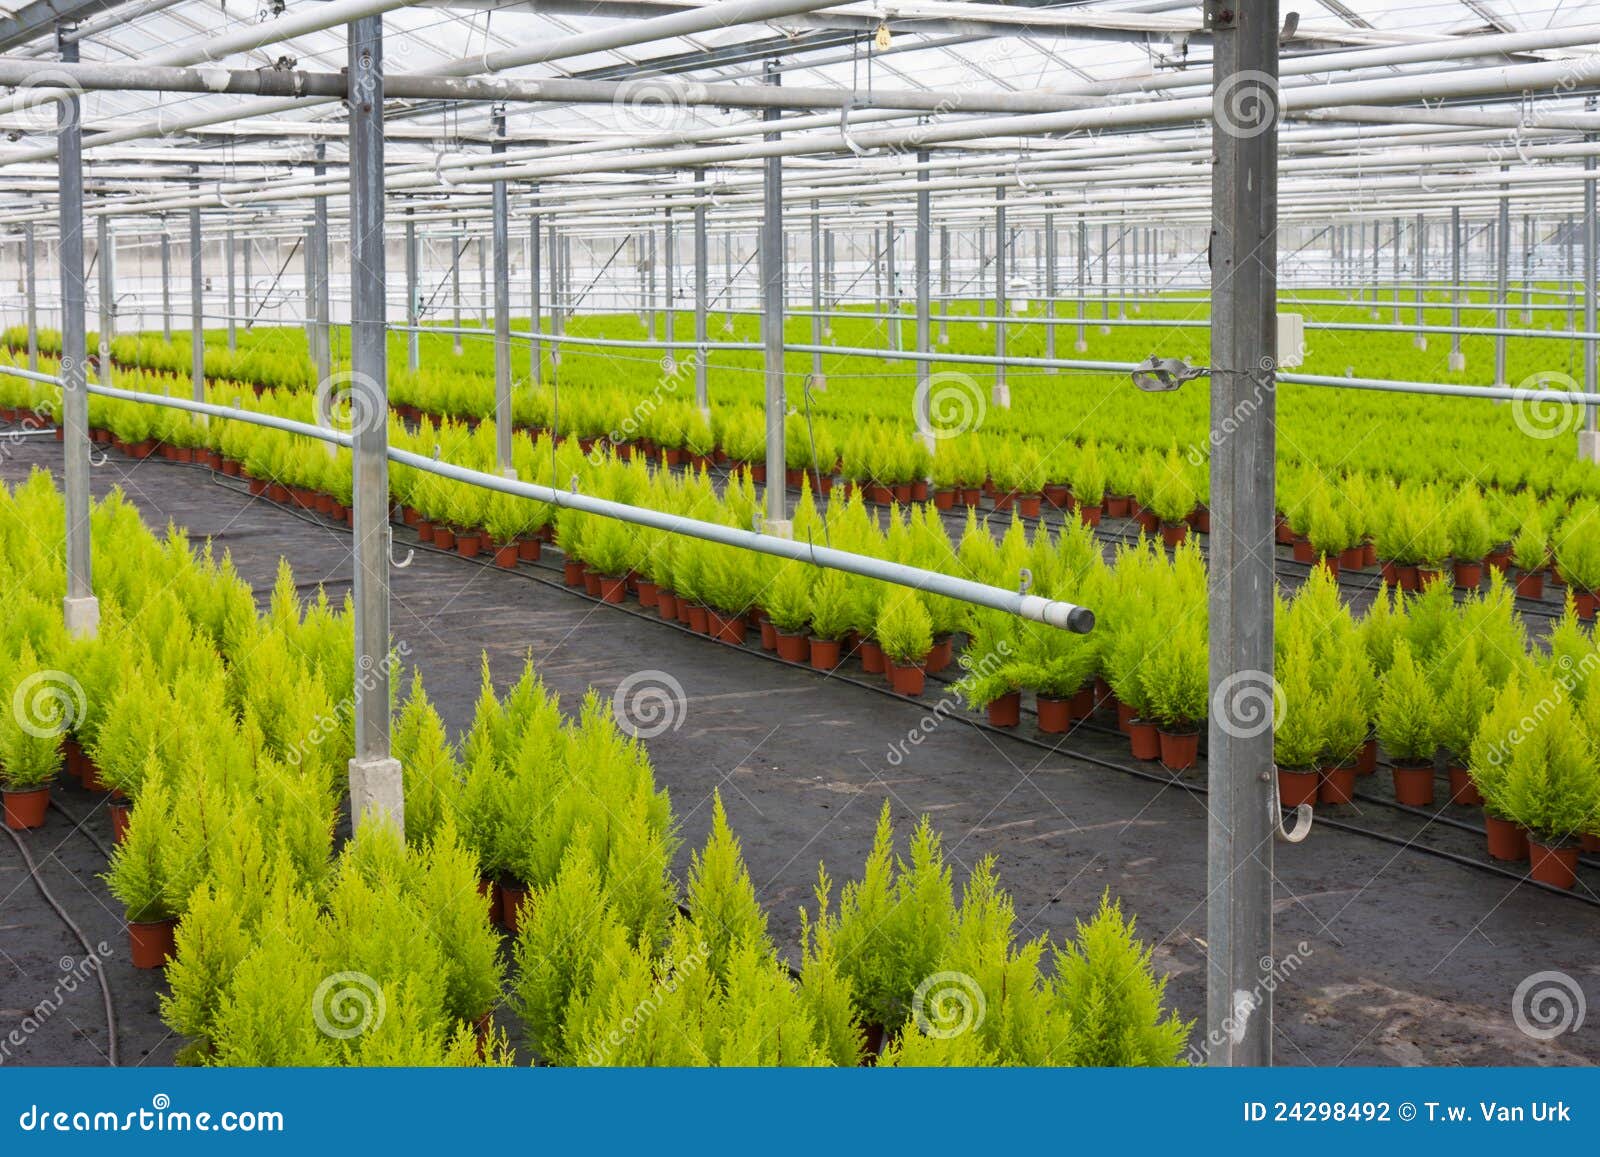 horticulture with cupressus in a greenhouse